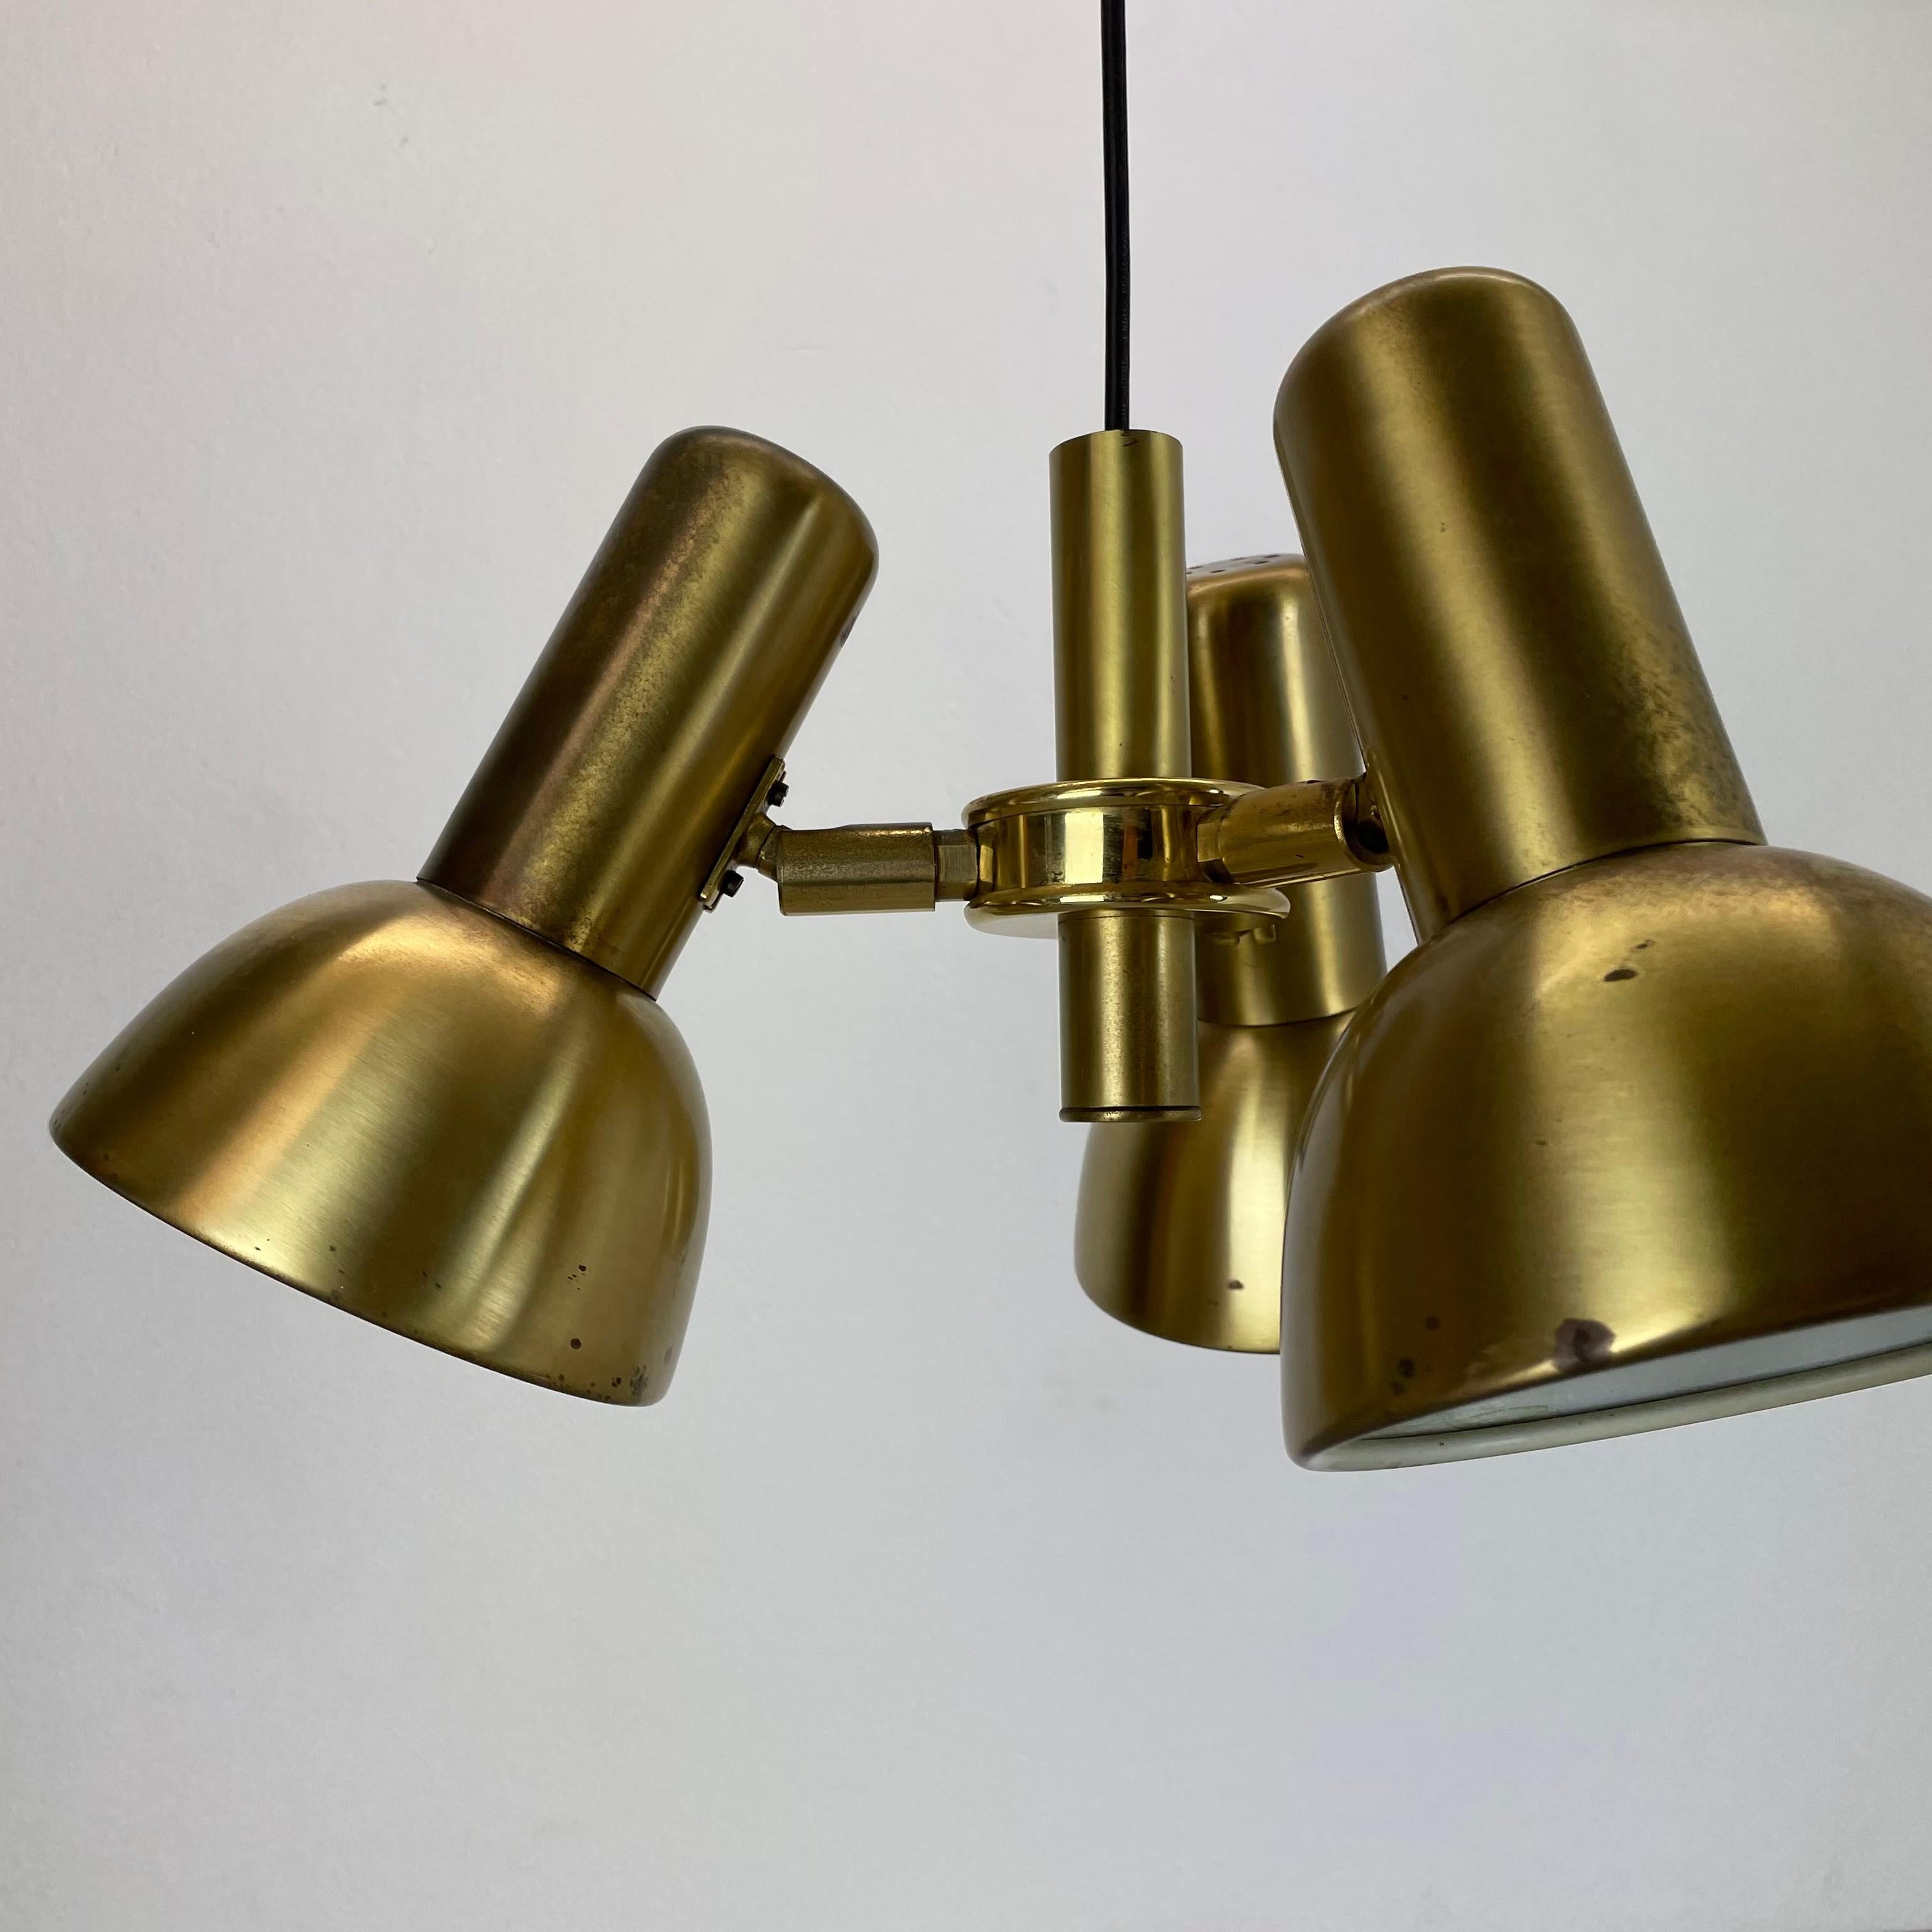 3-Spot Brass Tone Hanging Light Koch and Lowy Style OMI Lighting, Germany, 1970 For Sale 2